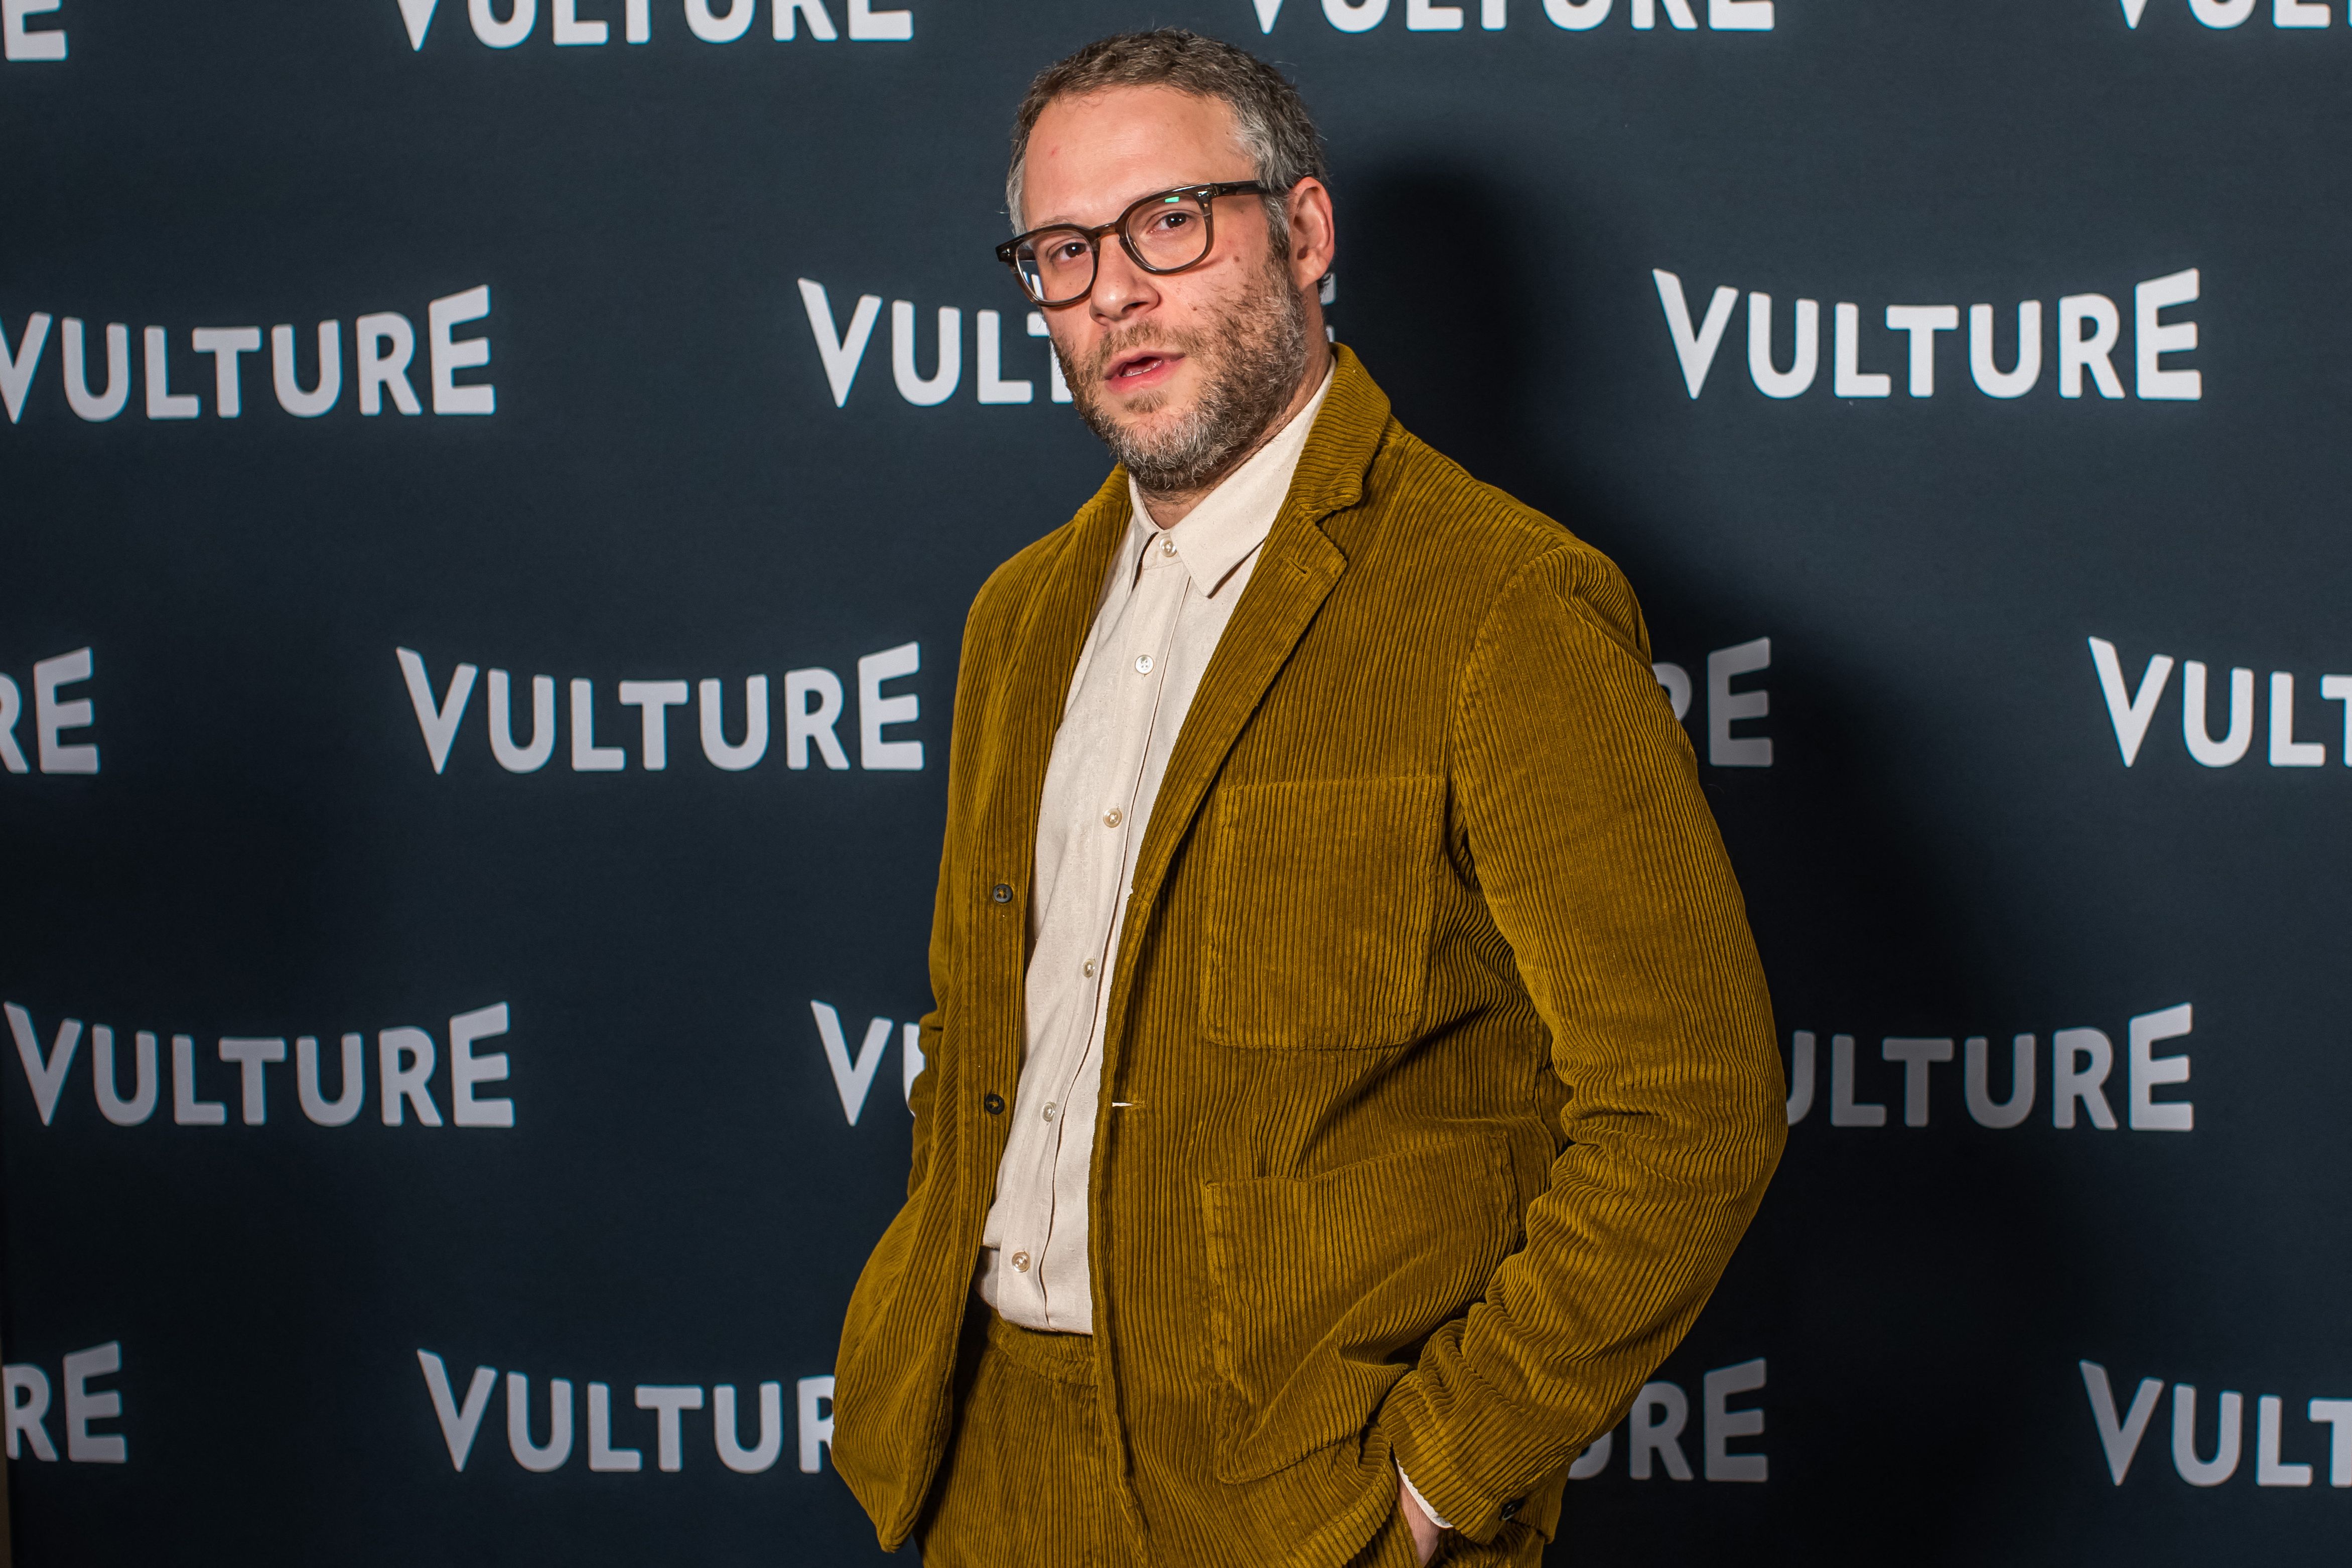 Seth Rogen poses for a Vulture event